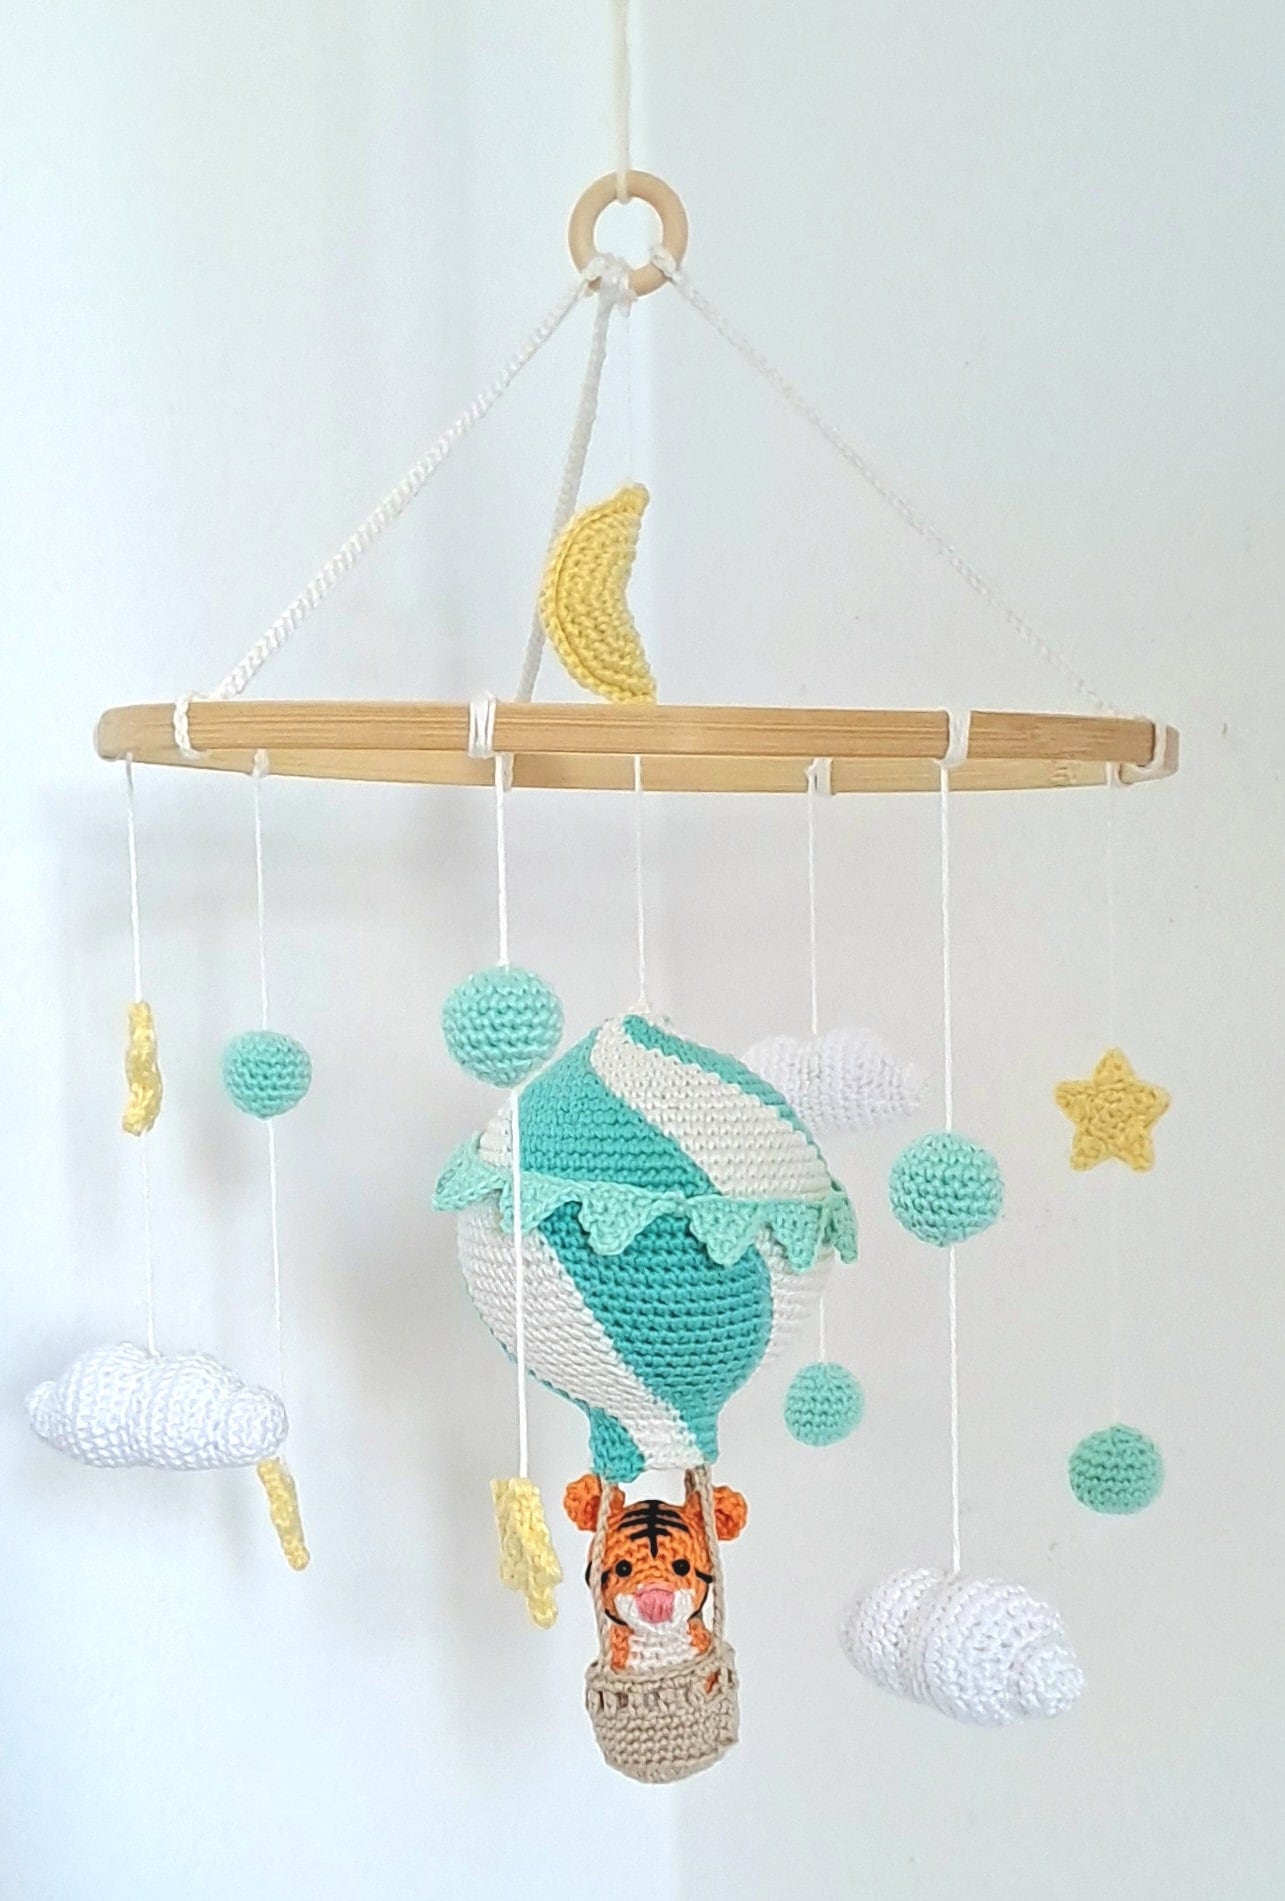 Hot air balloon with tiger baby mobile crochet pattern